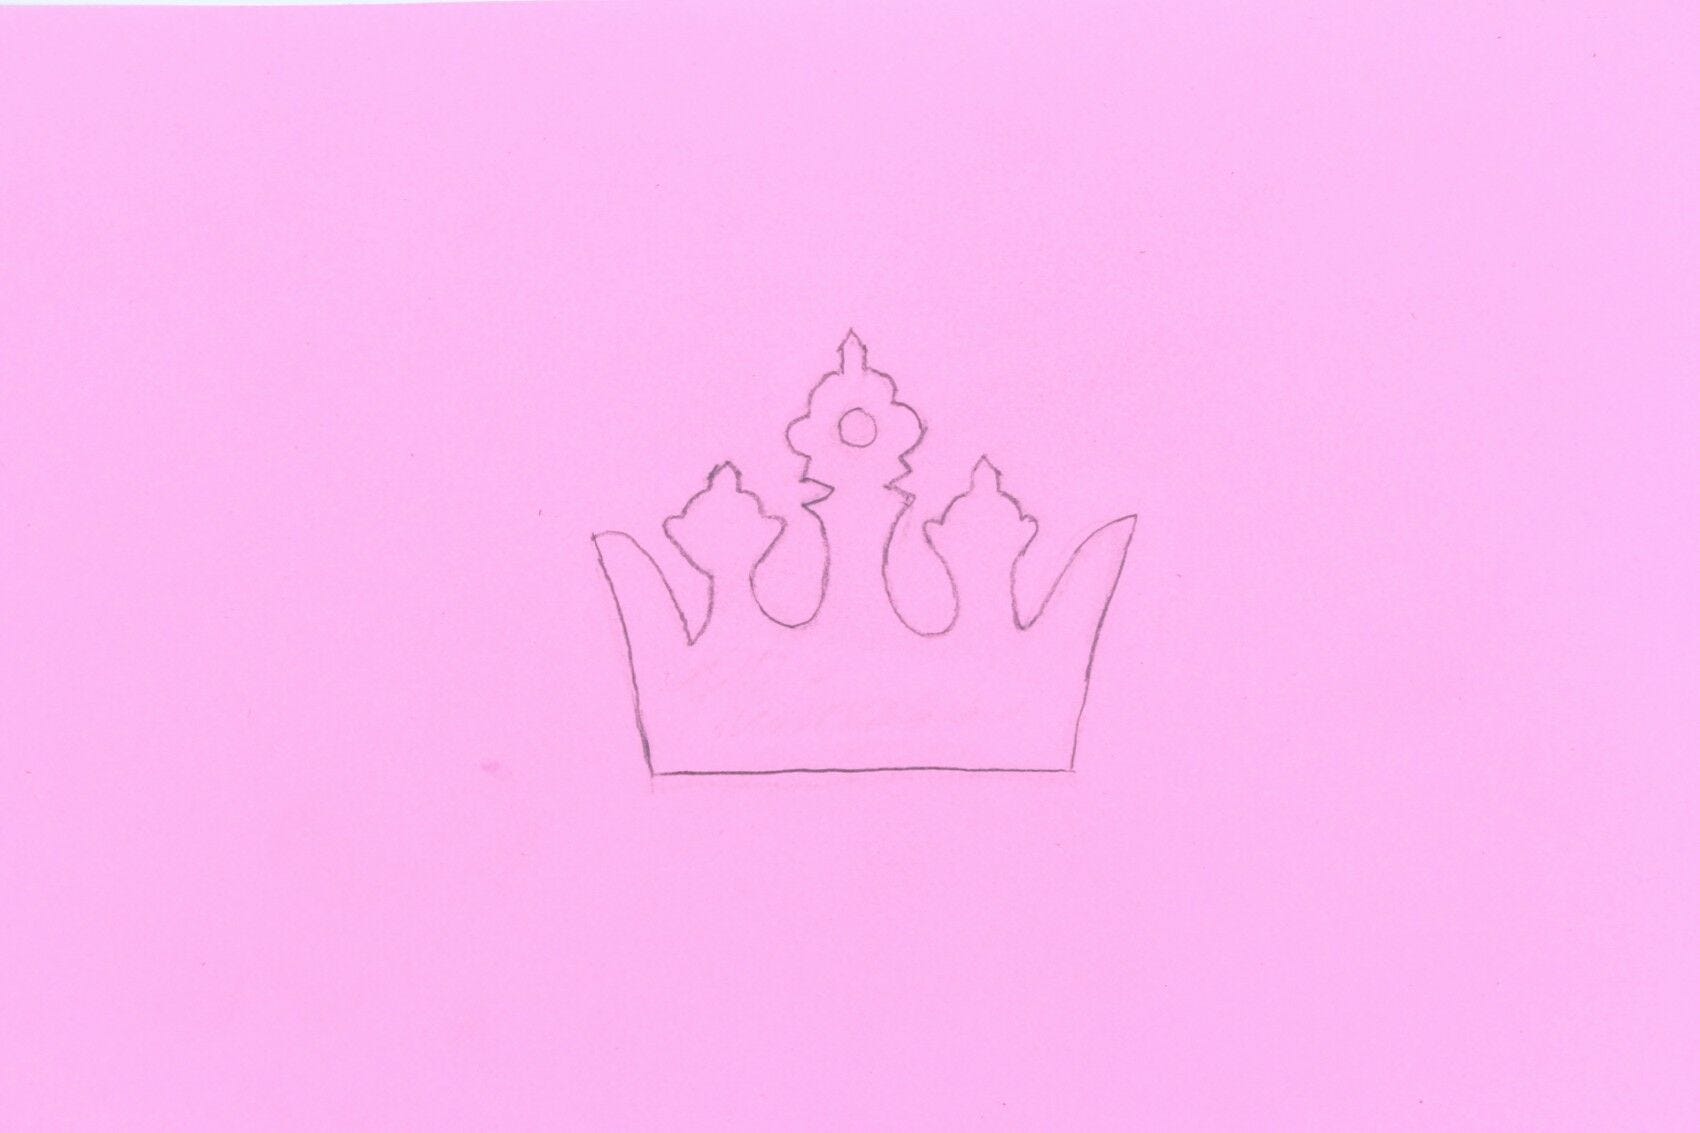 Crown drawing on pink paper